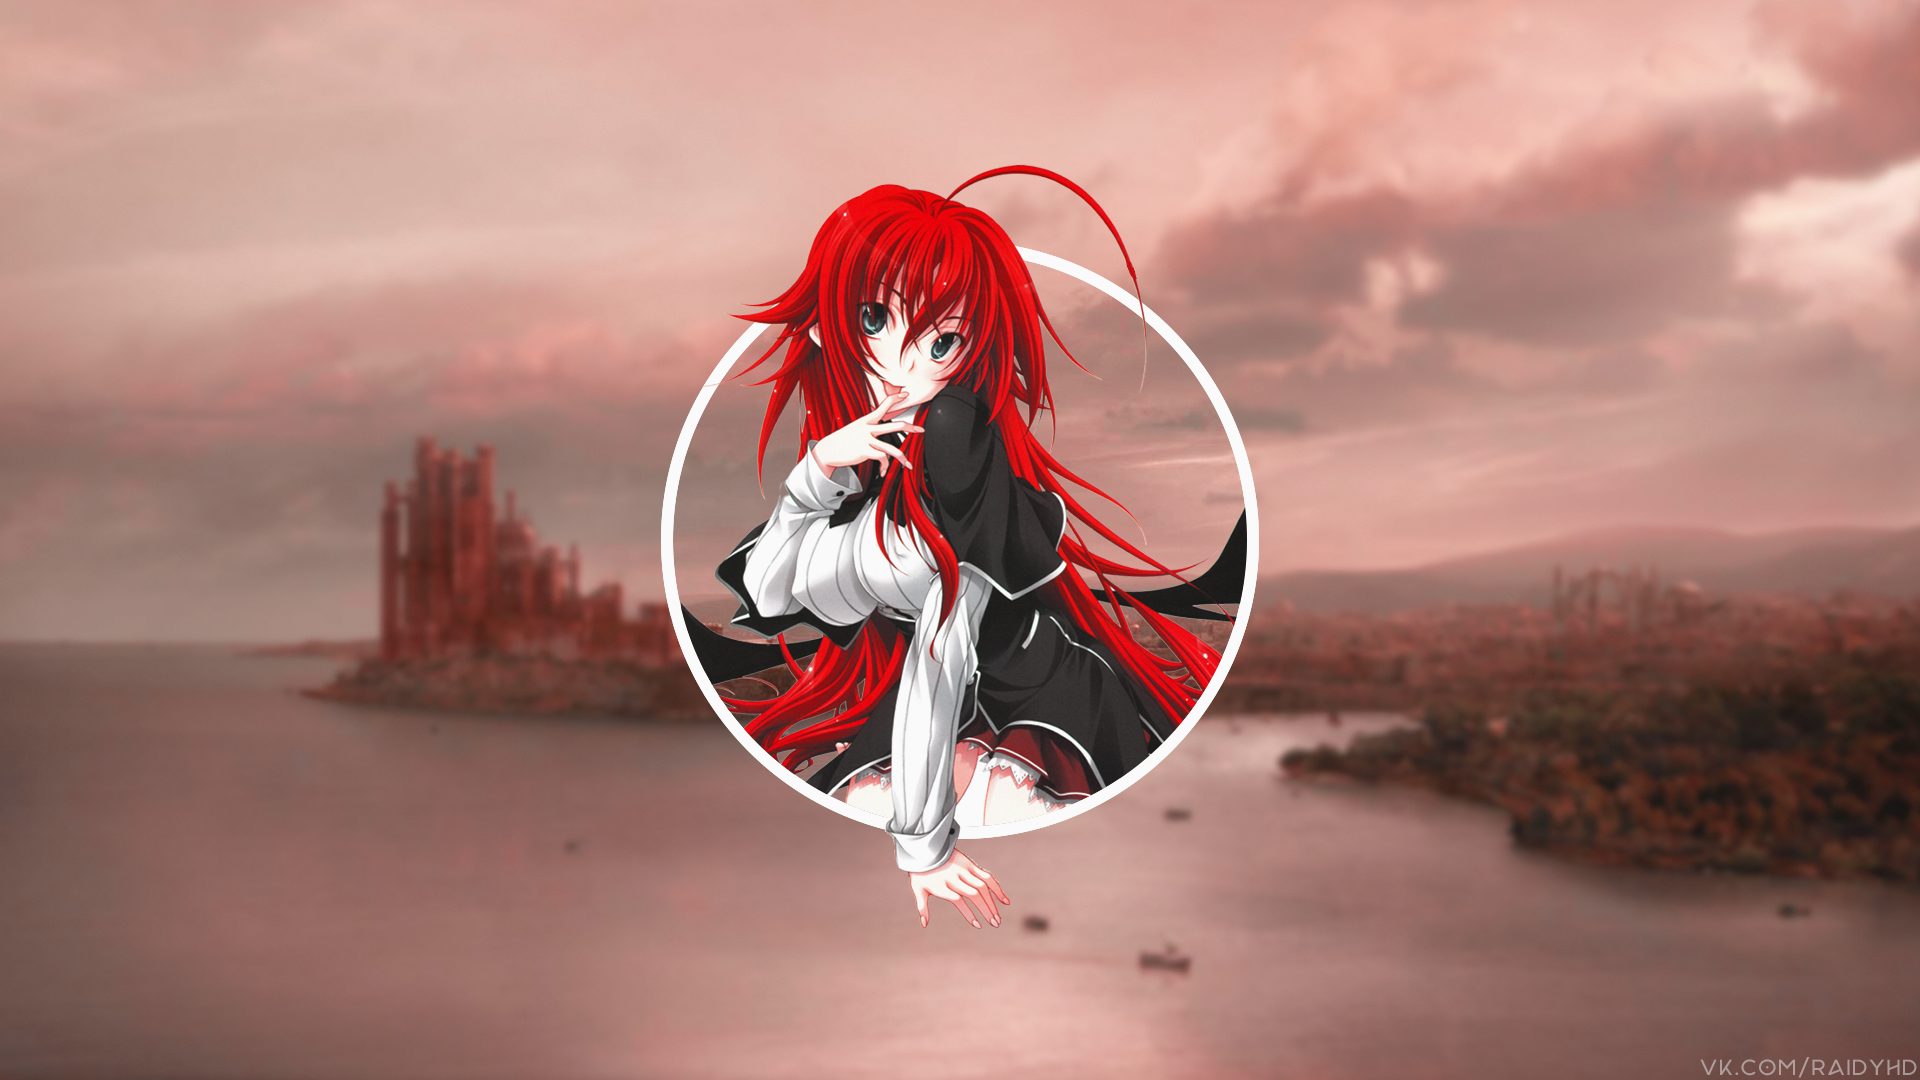 Anime 1920x1080 anime anime girls picture-in-picture Gremory Rias High School DxD watermarked